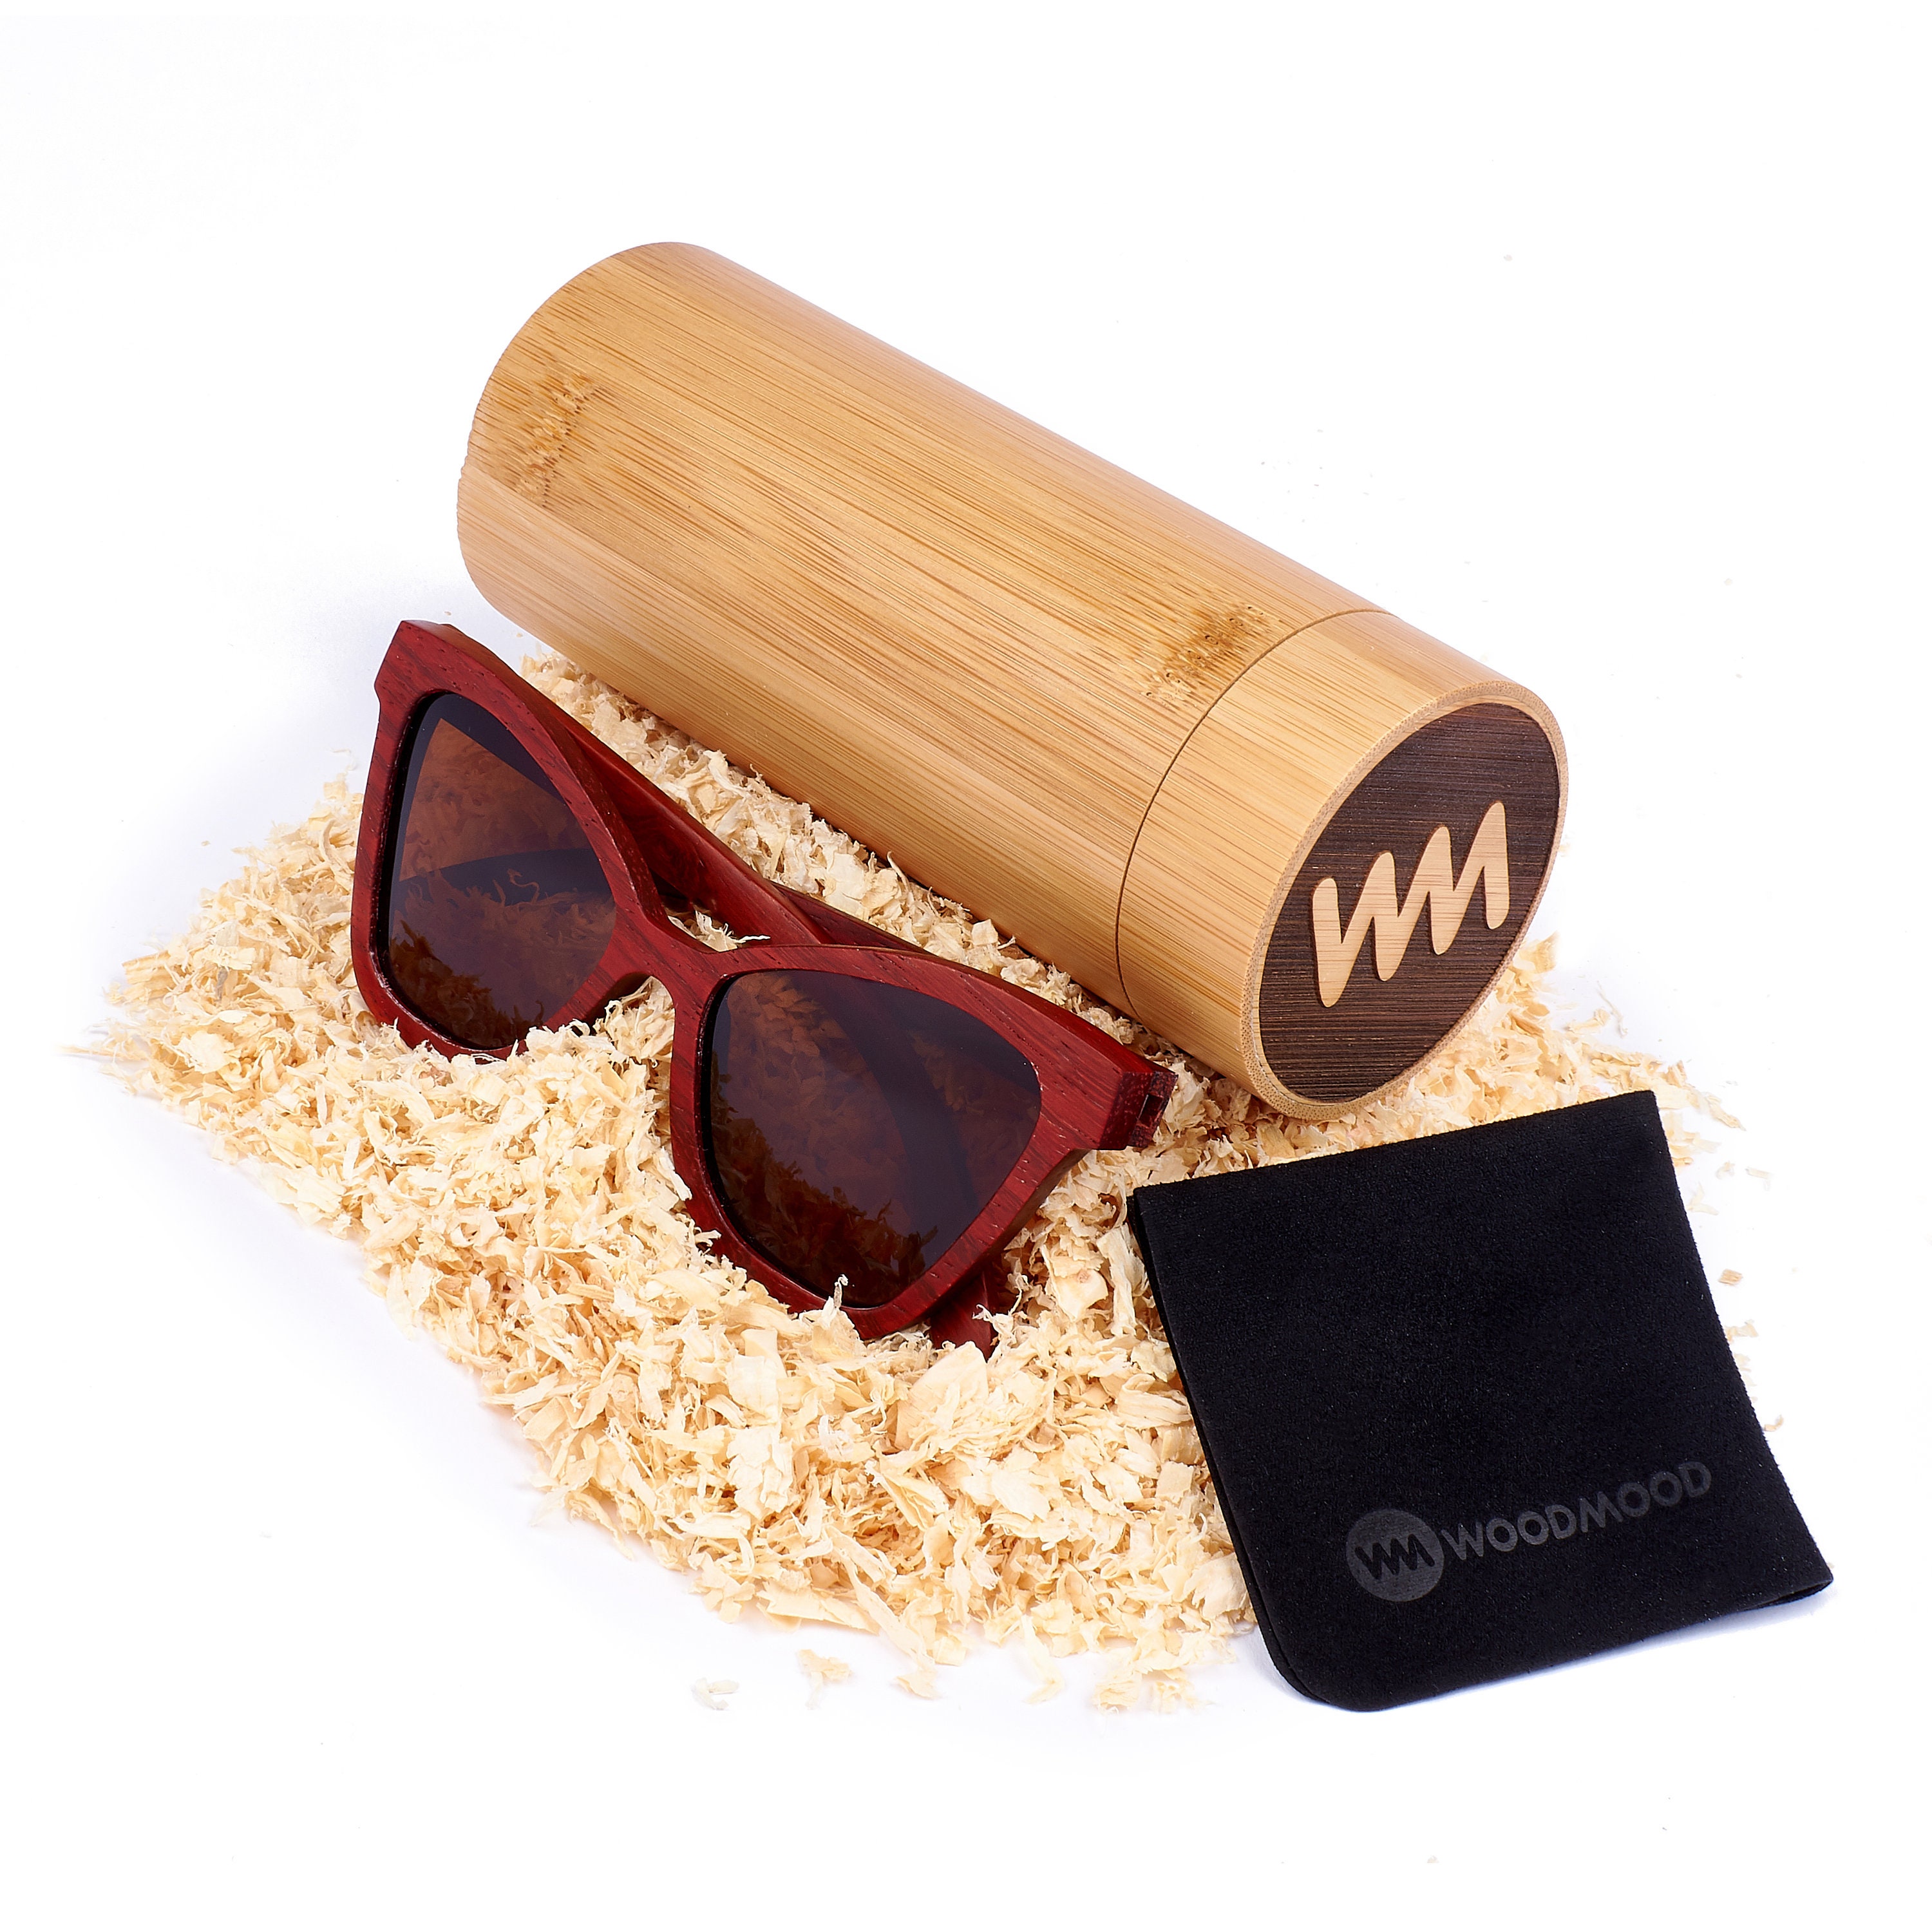 Wooden Sunglasses Woodmood Goddess Hand Crafted Engraved With Unique Design  and Polarized Lens Made From Cherry Wood Women Ladies 